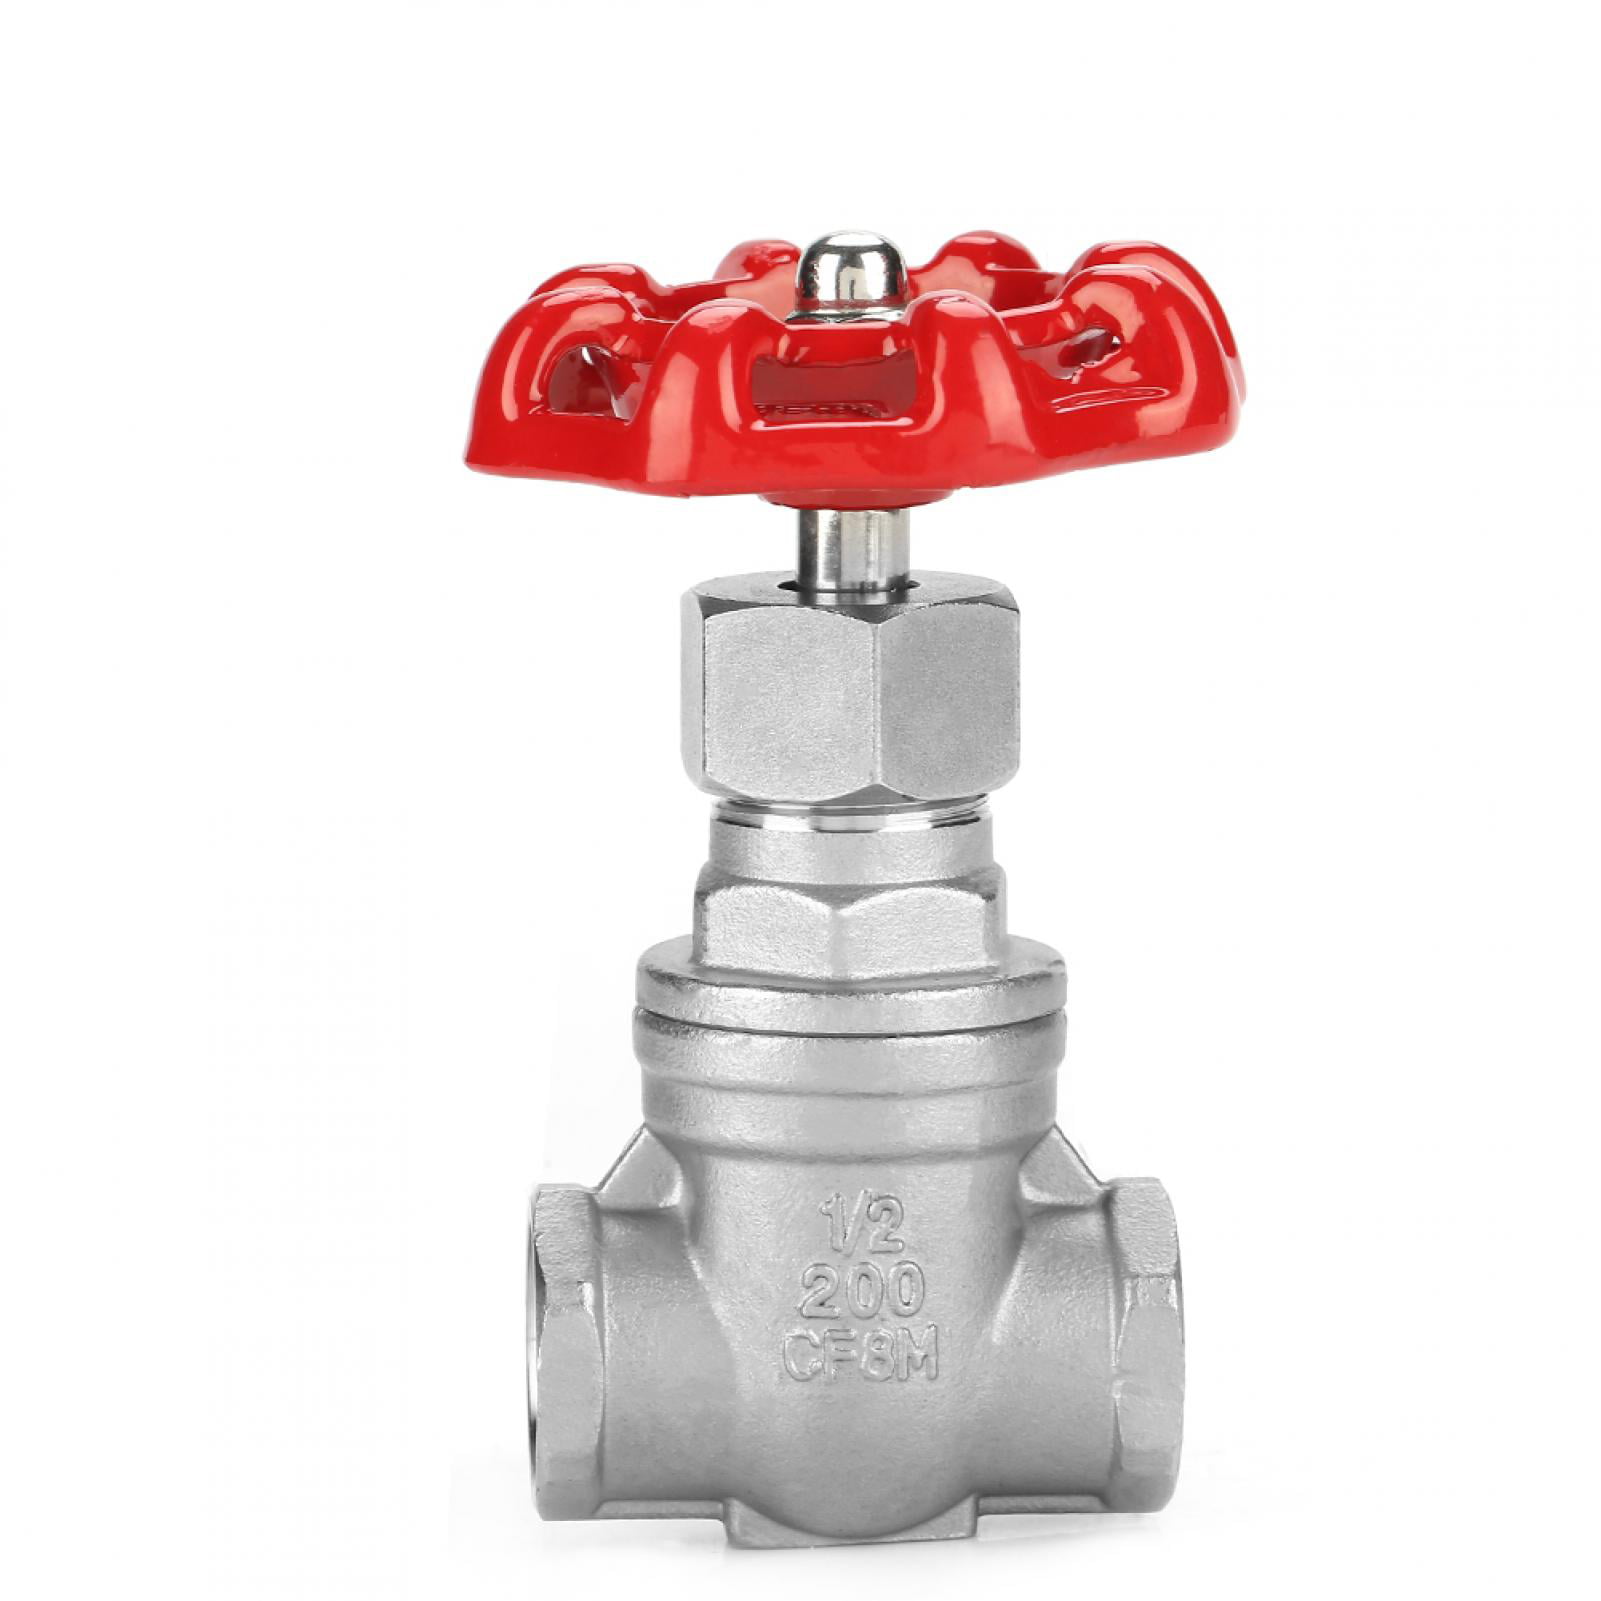 Sturdy Durable Sluice Valve Stainless Steel for Chemical Equipment Mechanical Equipment Valve 